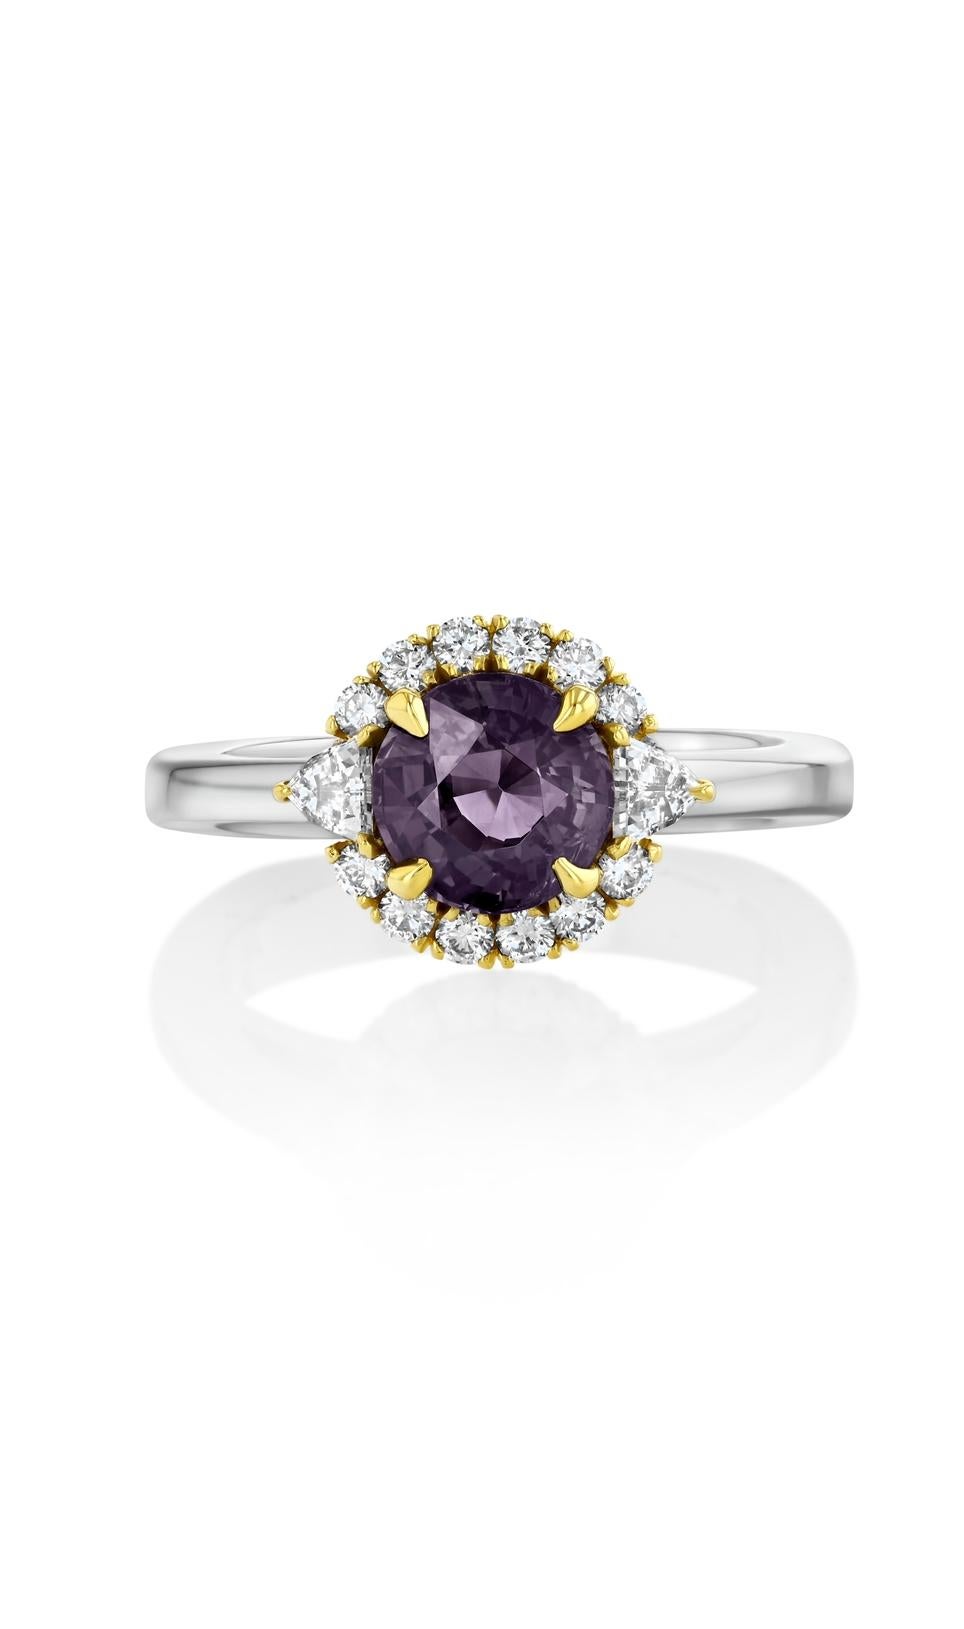 This enchanting 1.74-carat, Alexandrite from India, displays an olive green hue under white light and purplish gray under incandescent light. Framed by two epaulette and 34 round diamonds, the jewels are presented in 18K yellow gold and platinum.